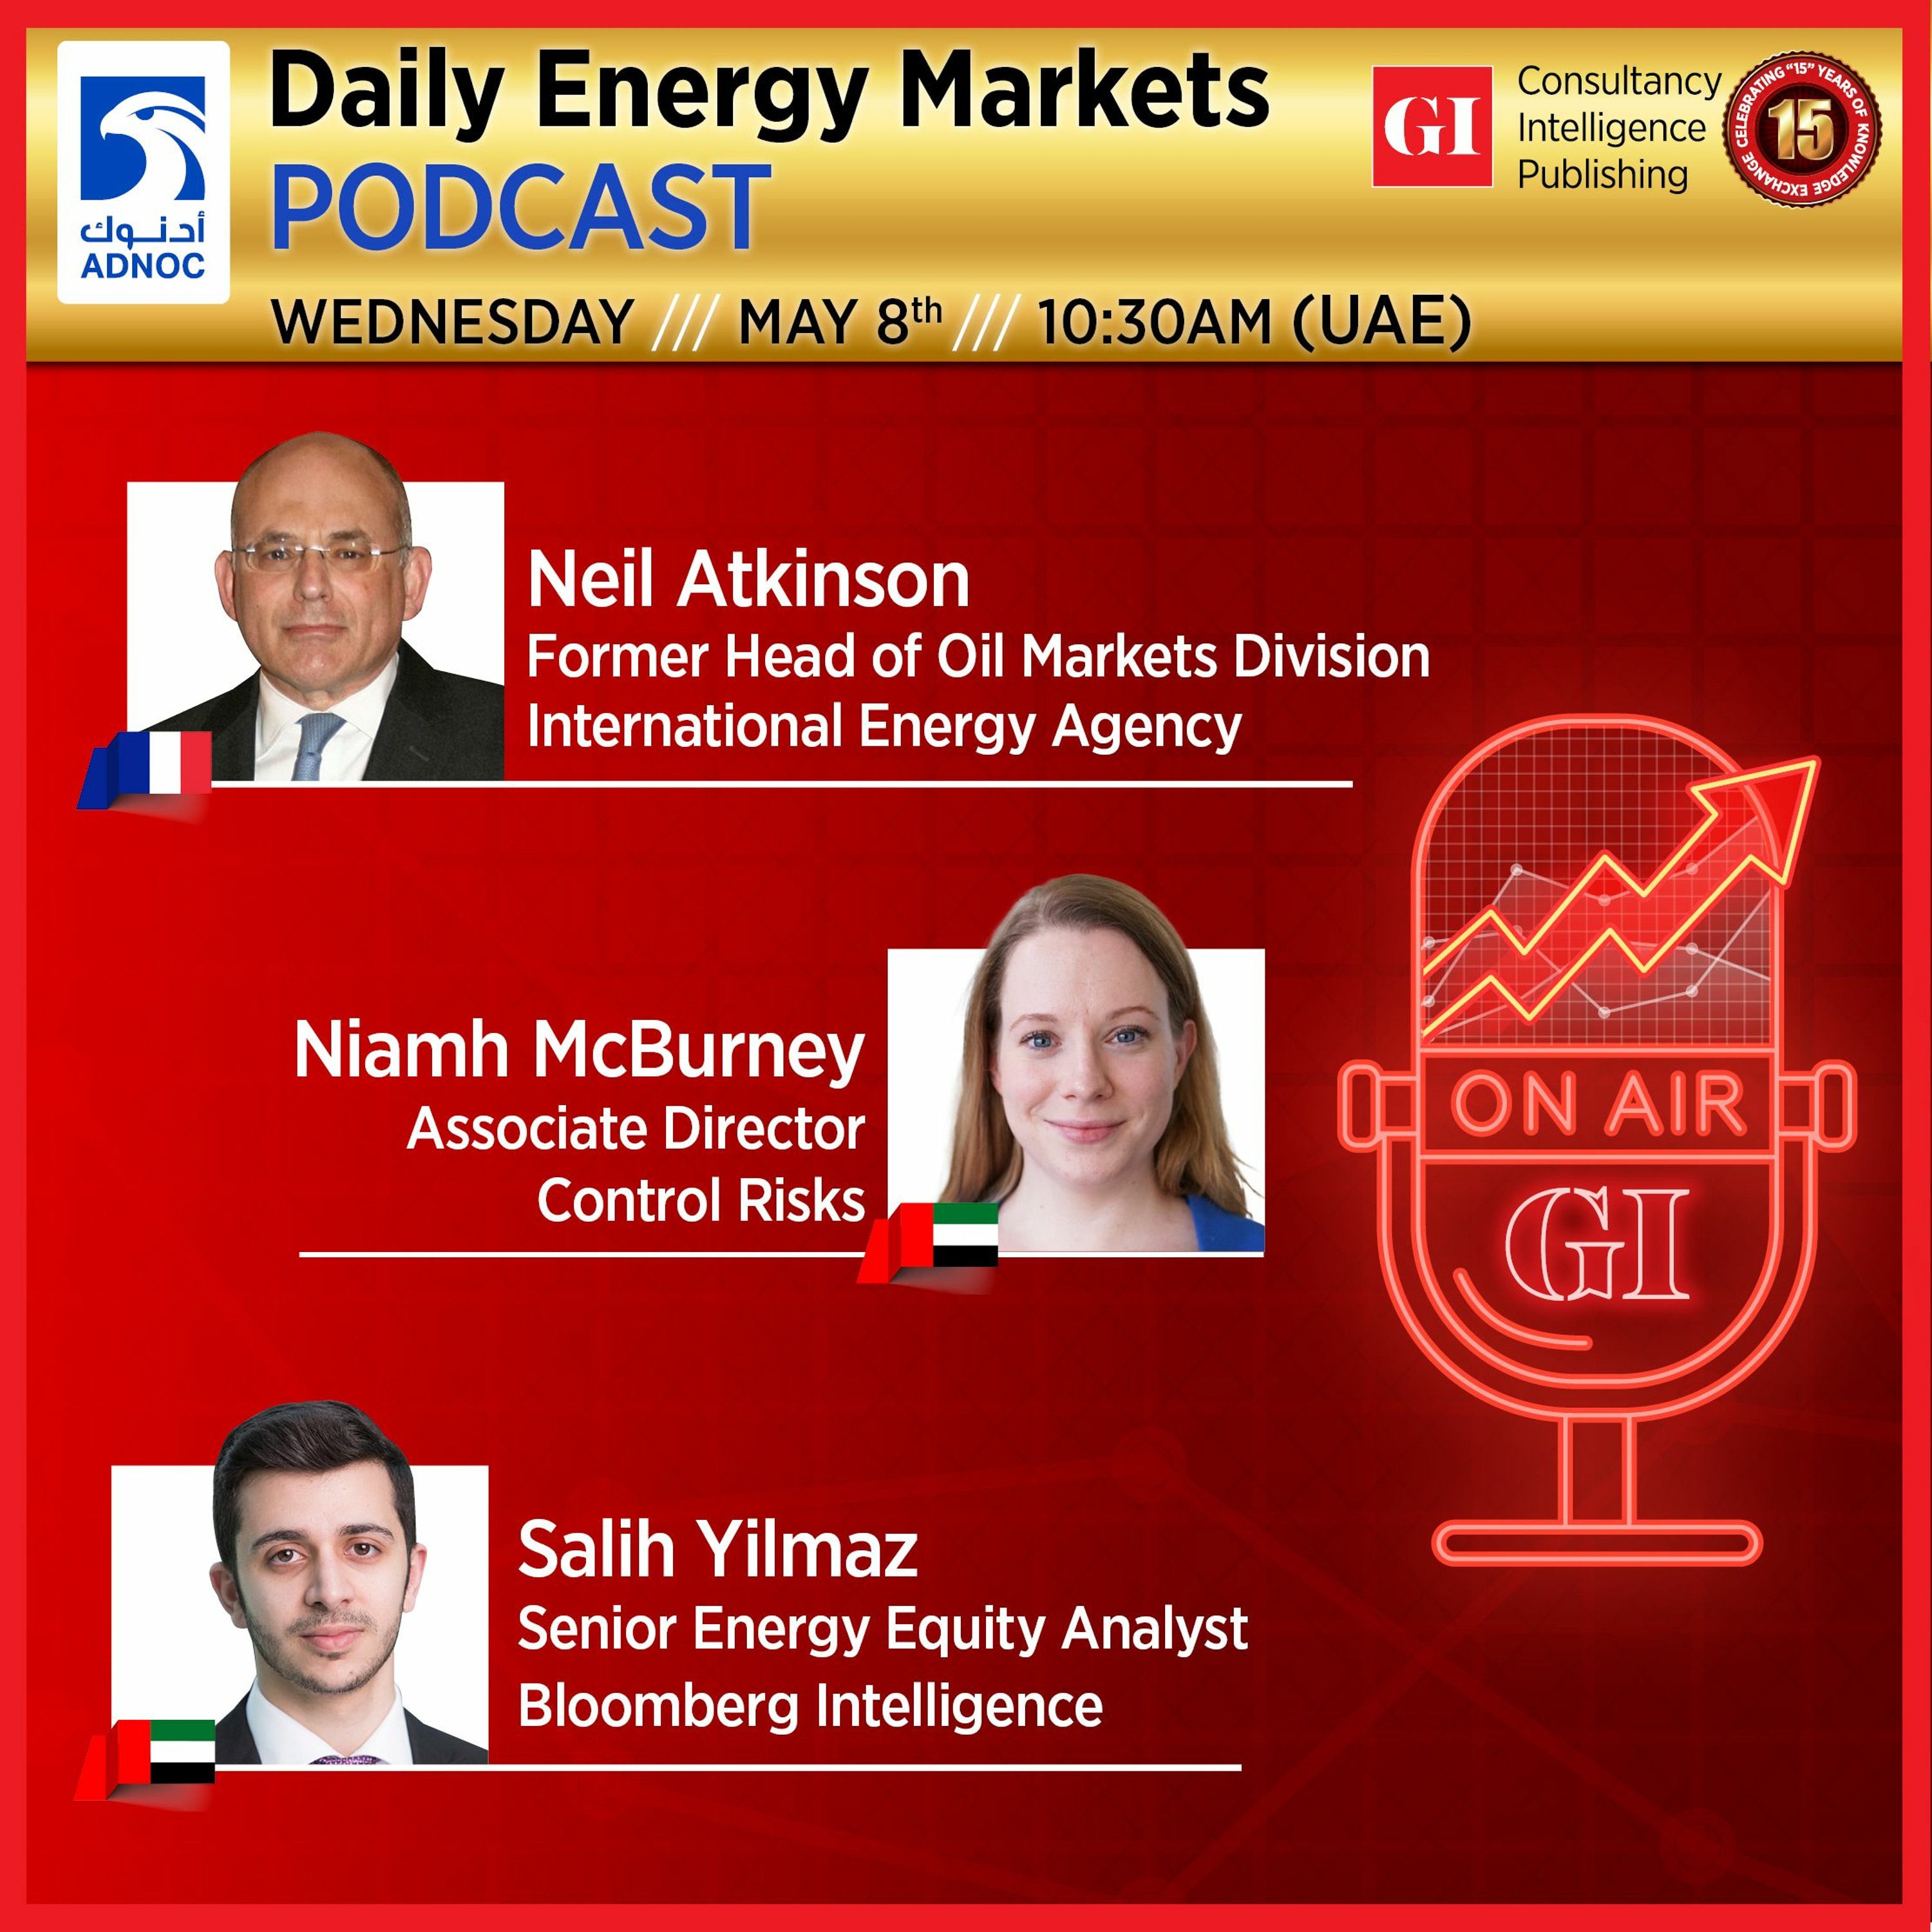 PODCAST: Daily Energy Markets - May 8th